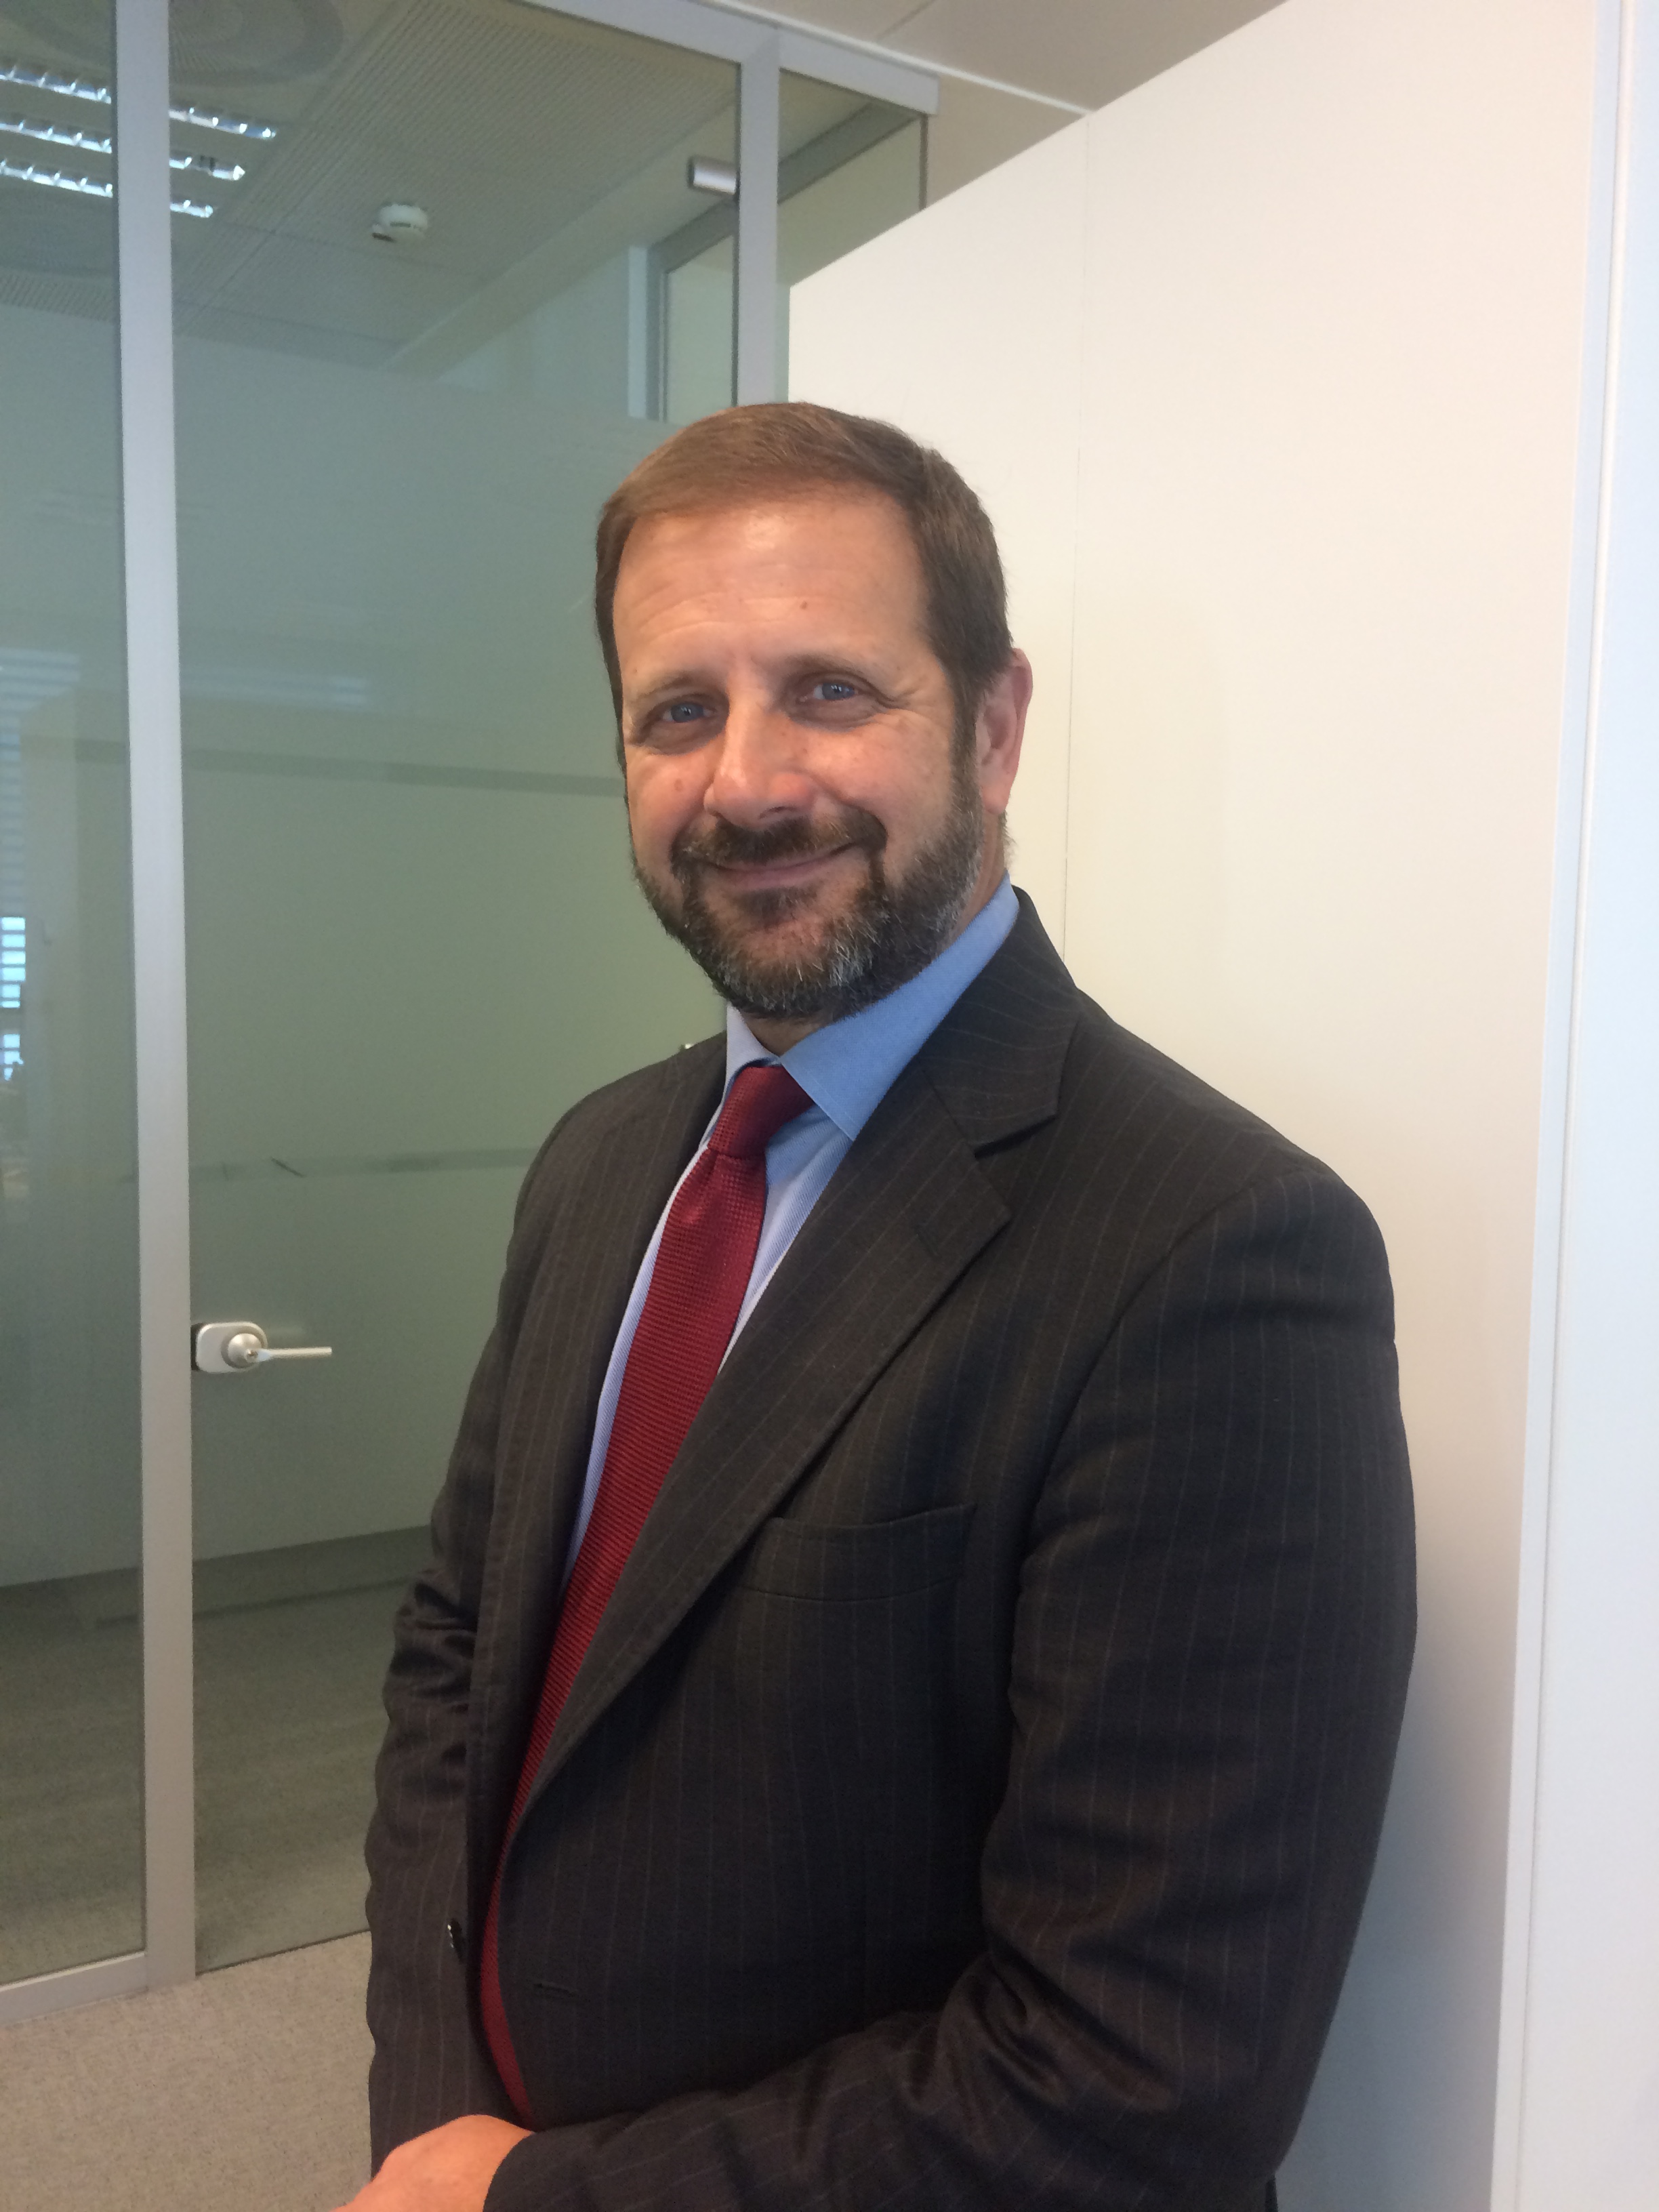 Interview with...Nicola Privato - Regional Manager Southern Europe & Africa DNV GL Business Assurance